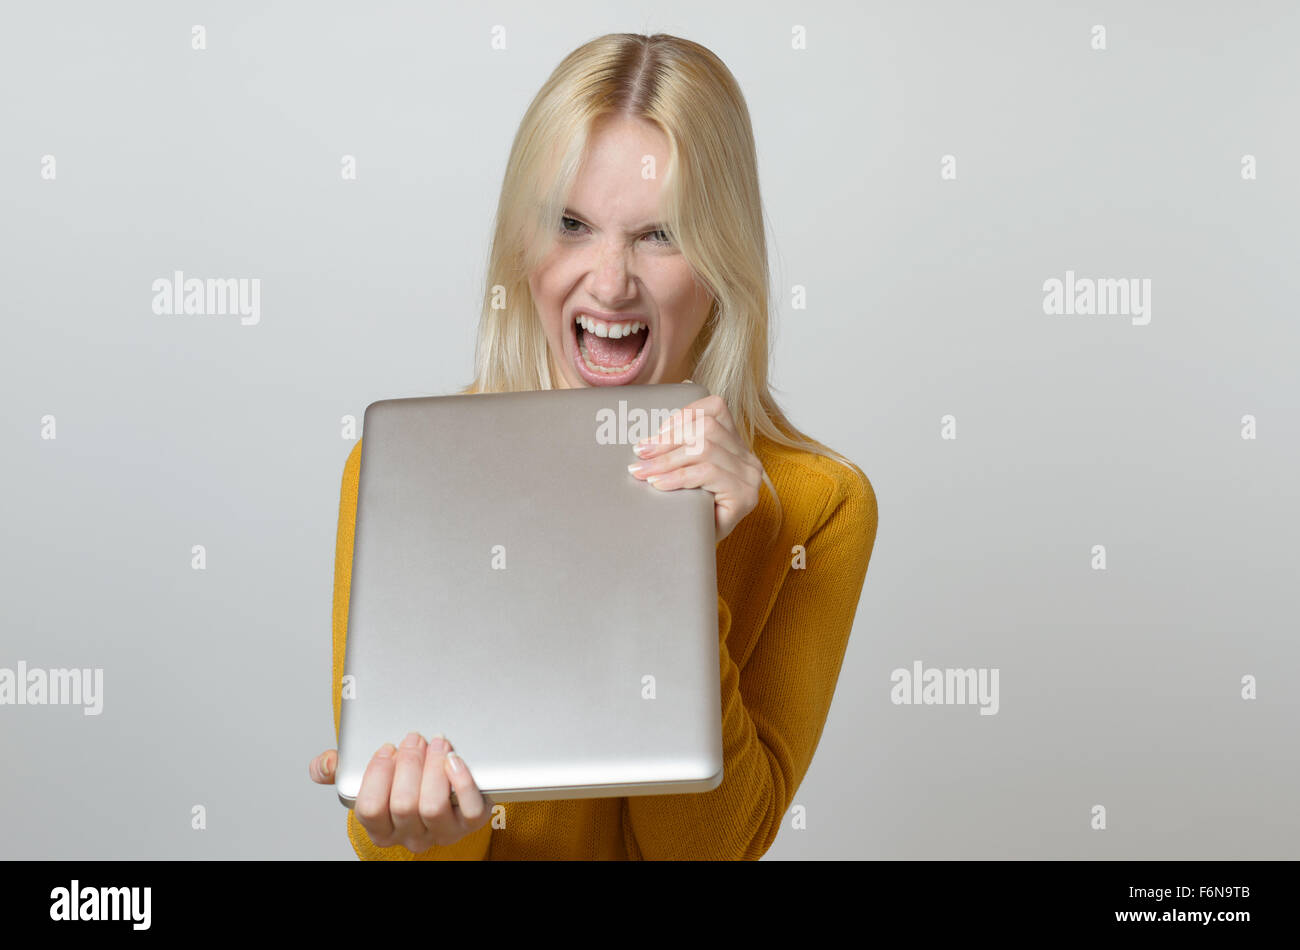 Blond Young Woman Showing Angry Face at the Camera While Holding her Laptop Computer Against White Background. Stock Photo